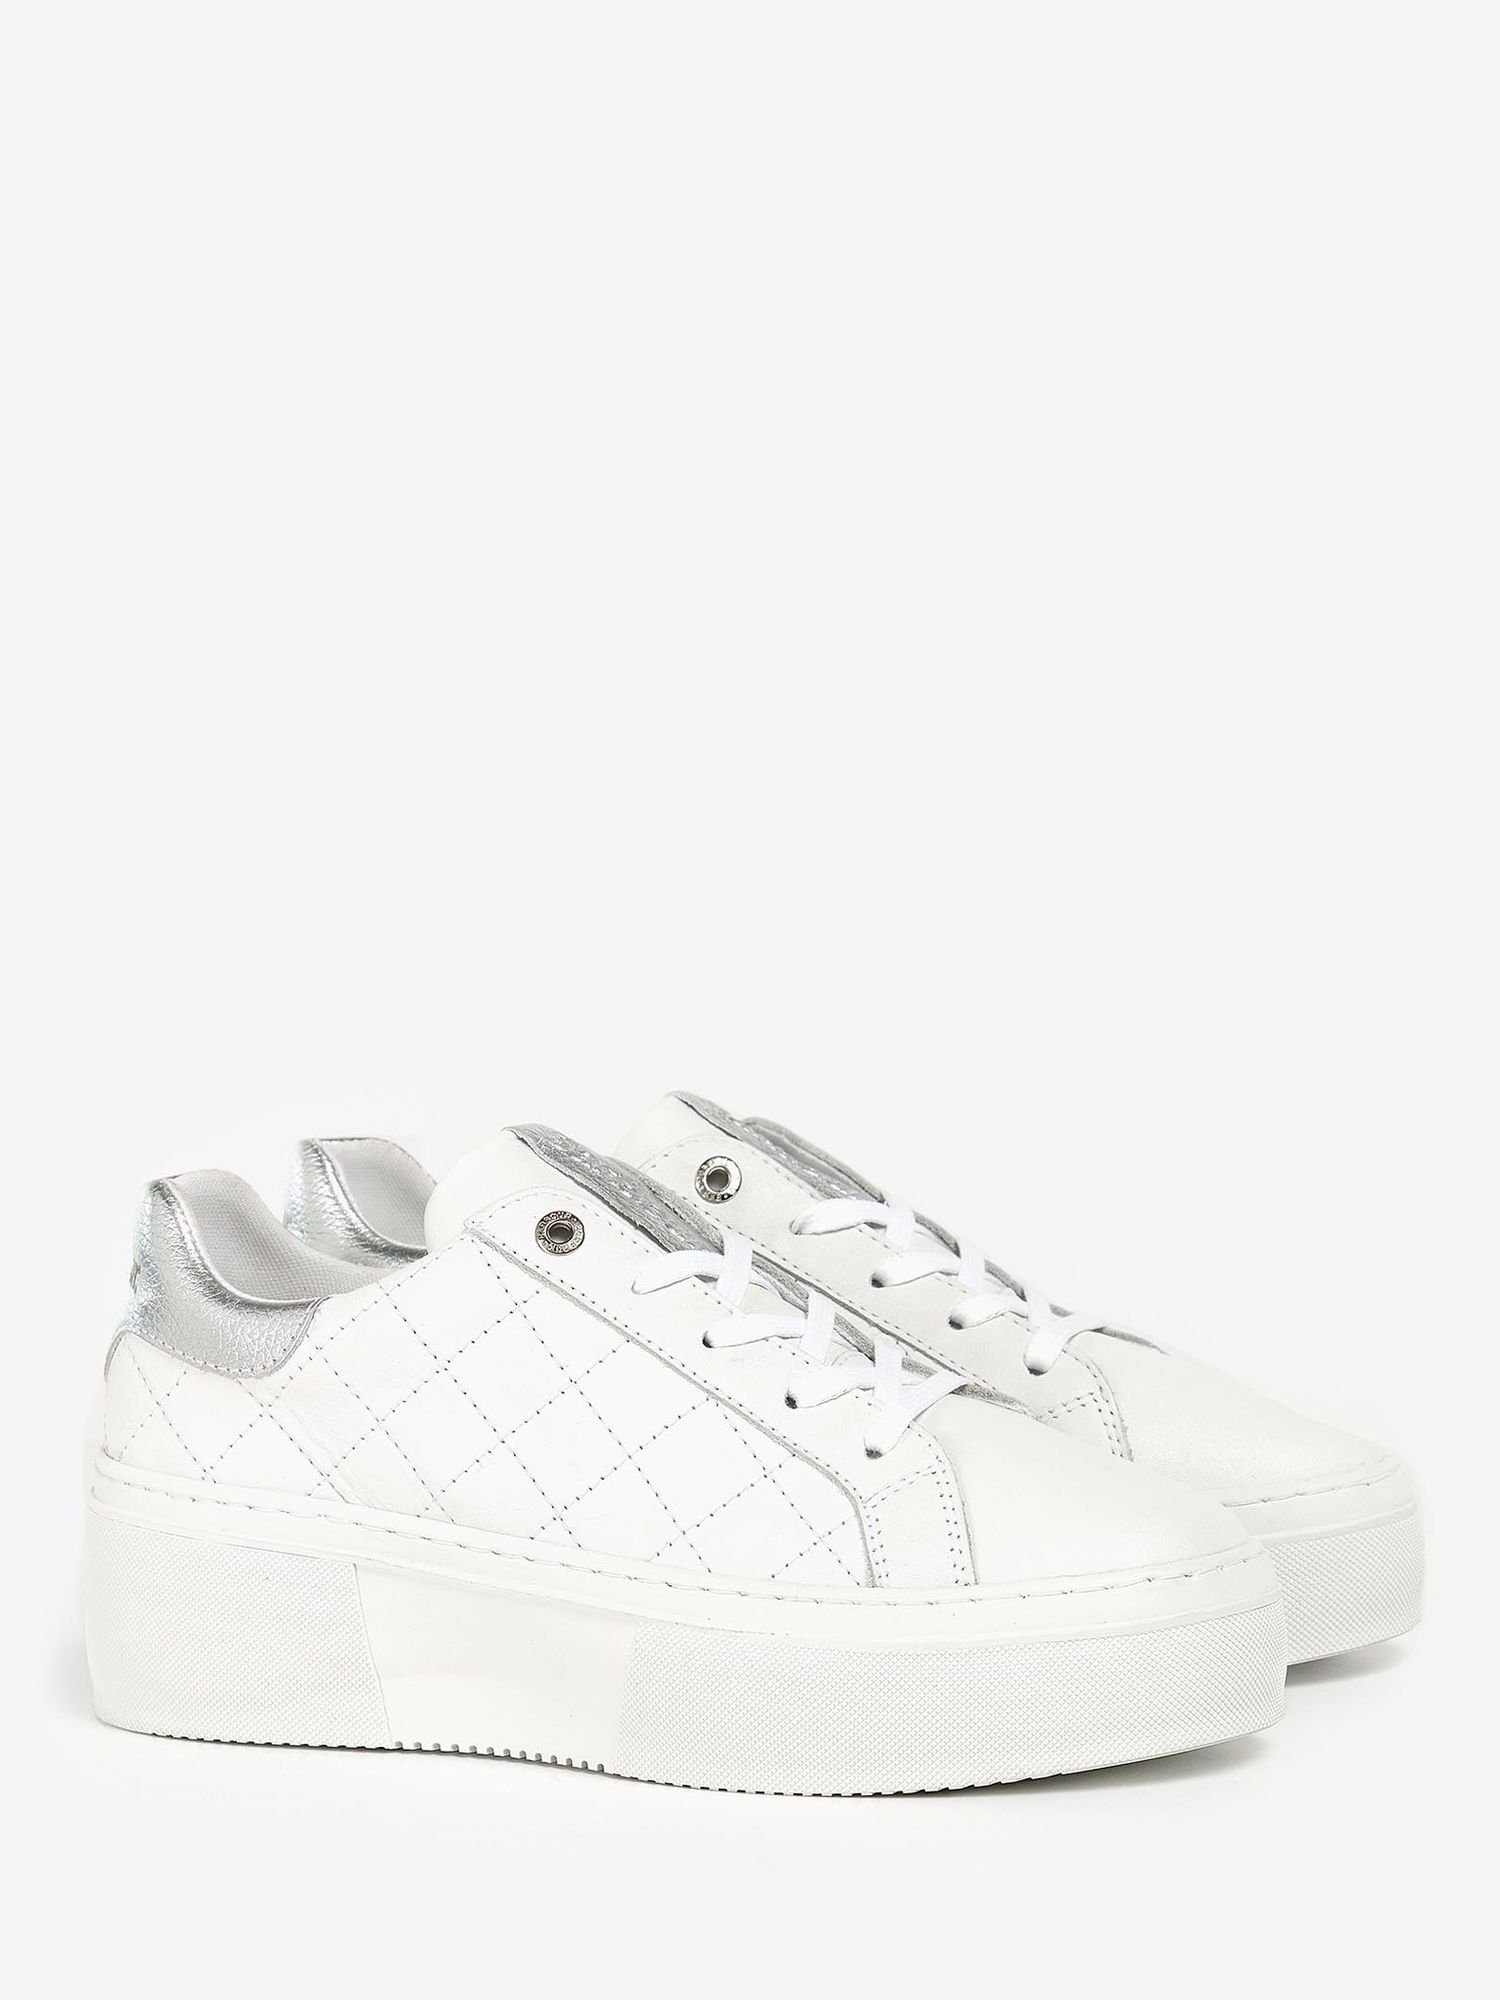 Barbour Darla Leather Diamond Quilted Flatform Trainers, White/Waterfall, 4